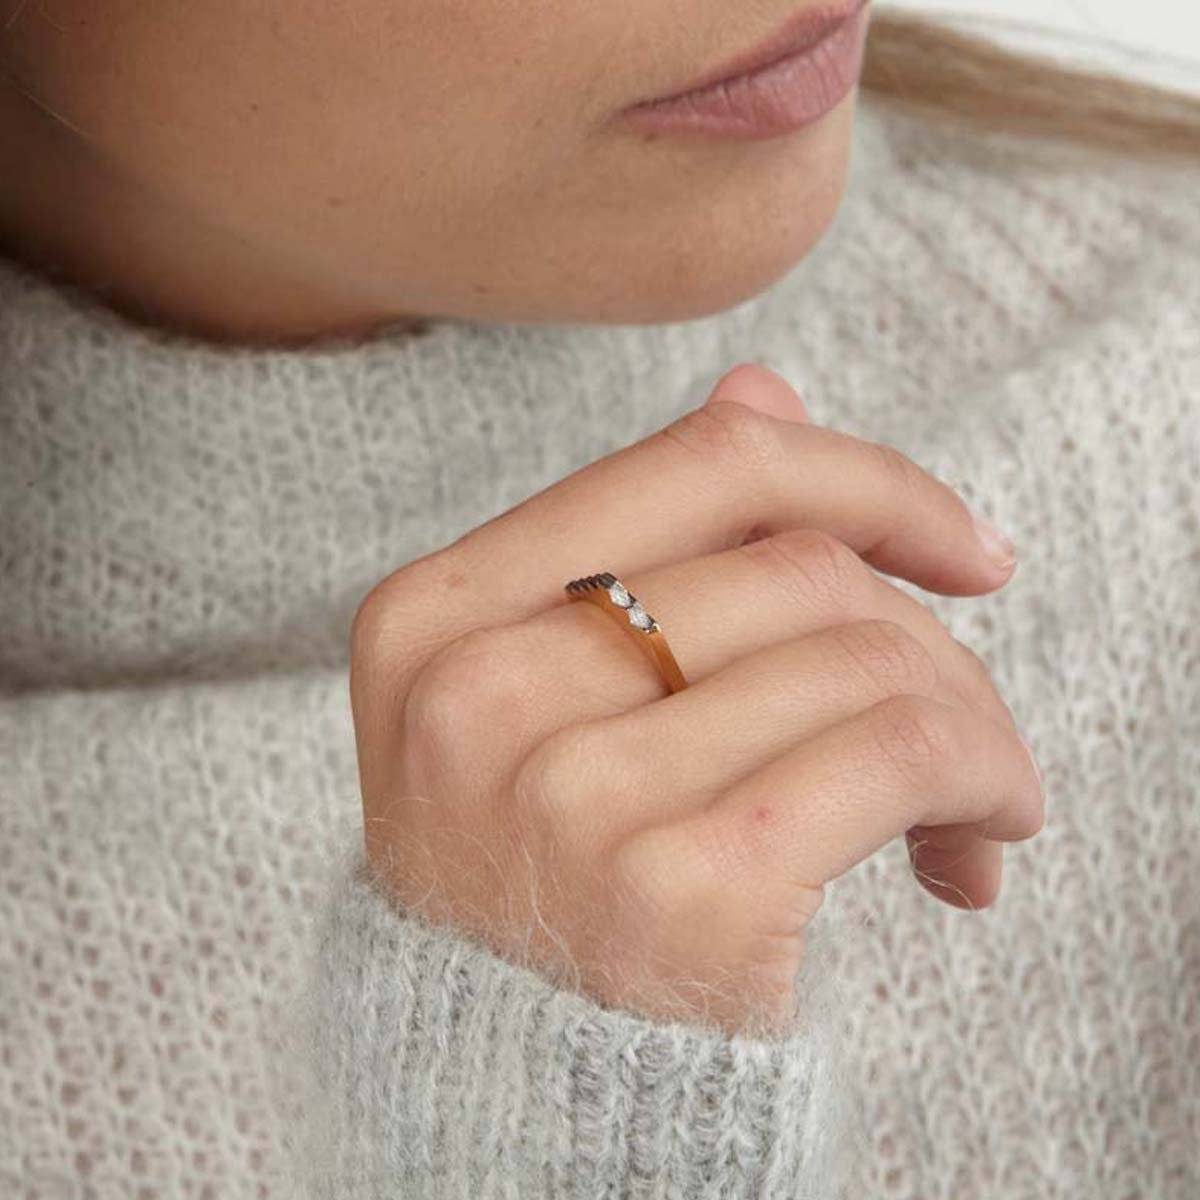 Jewel Tree London is a sustainable jewellery and ethical jewellery brand